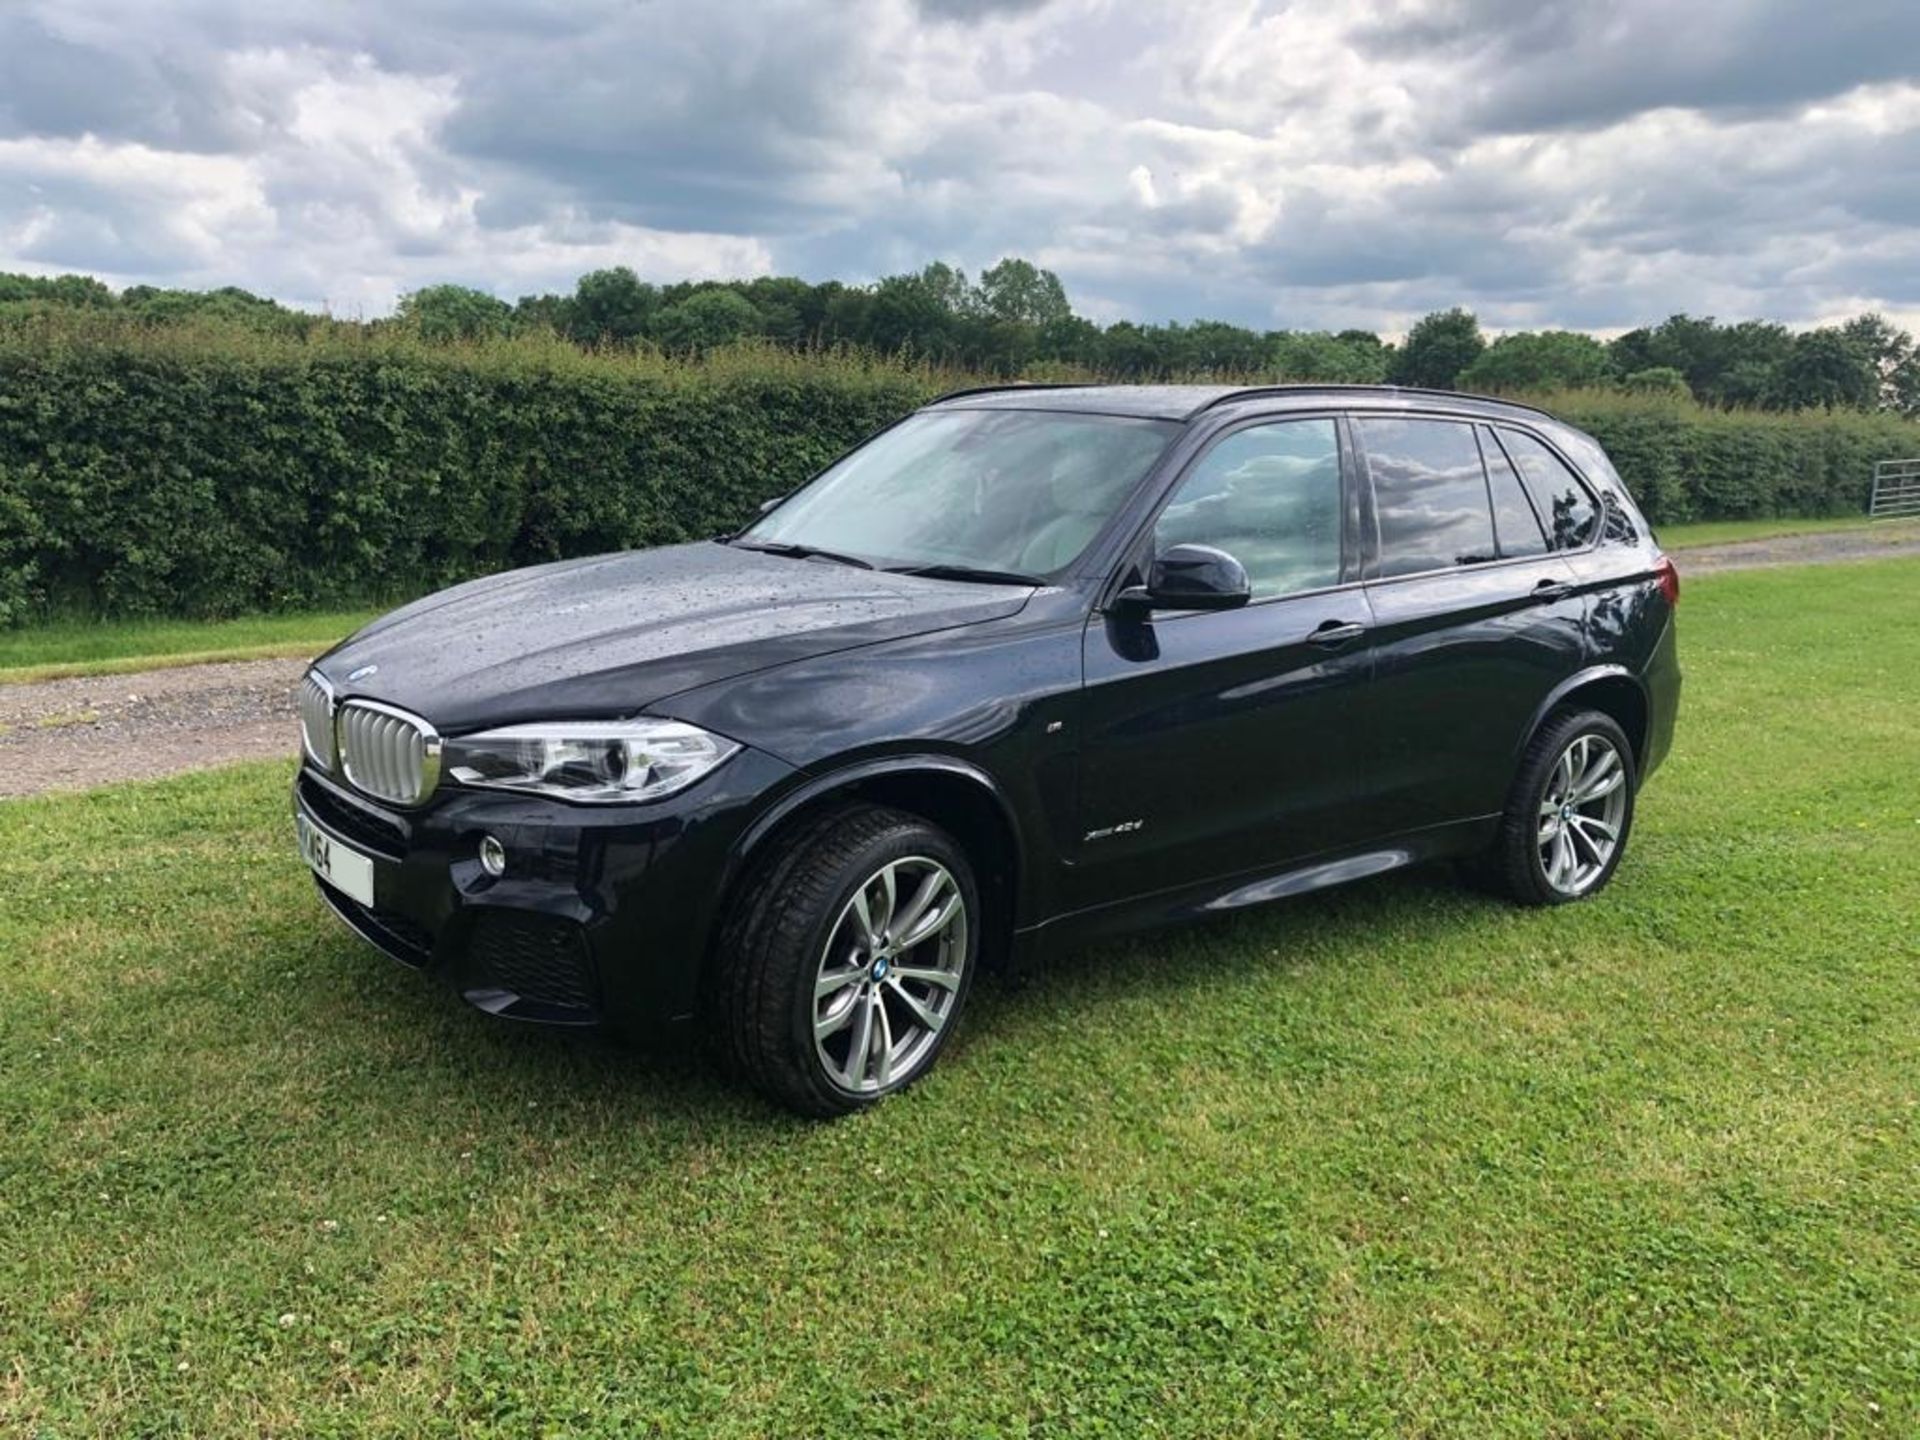 2015/64 REG BMW X5 XDRIVE 40D M SPORT AUTO 3.0 DIESEL, SHOWING 1 OWNER FROM NEW *NO VAT* - Image 3 of 21